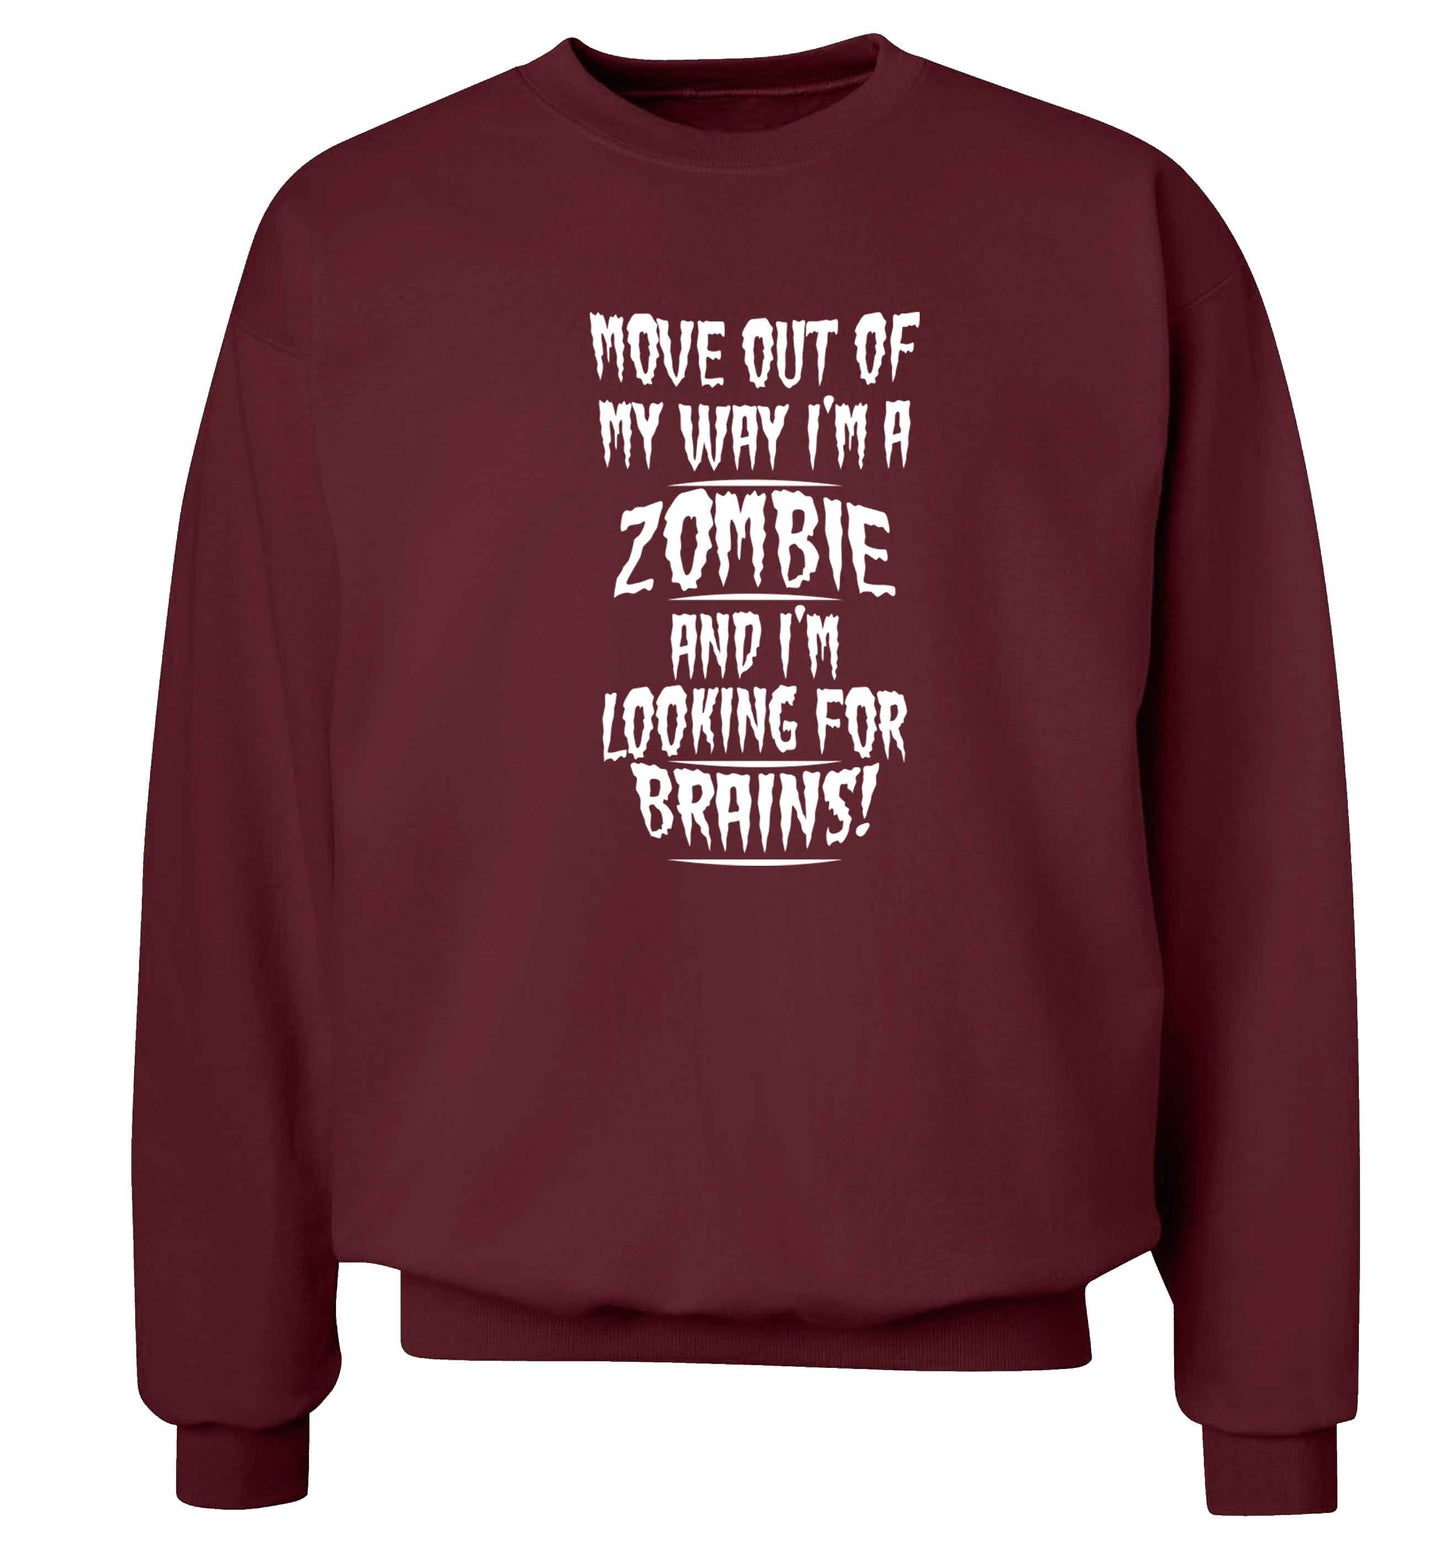 I'm a zombie and I'm looking for brains! Adult's unisex maroon Sweater 2XL